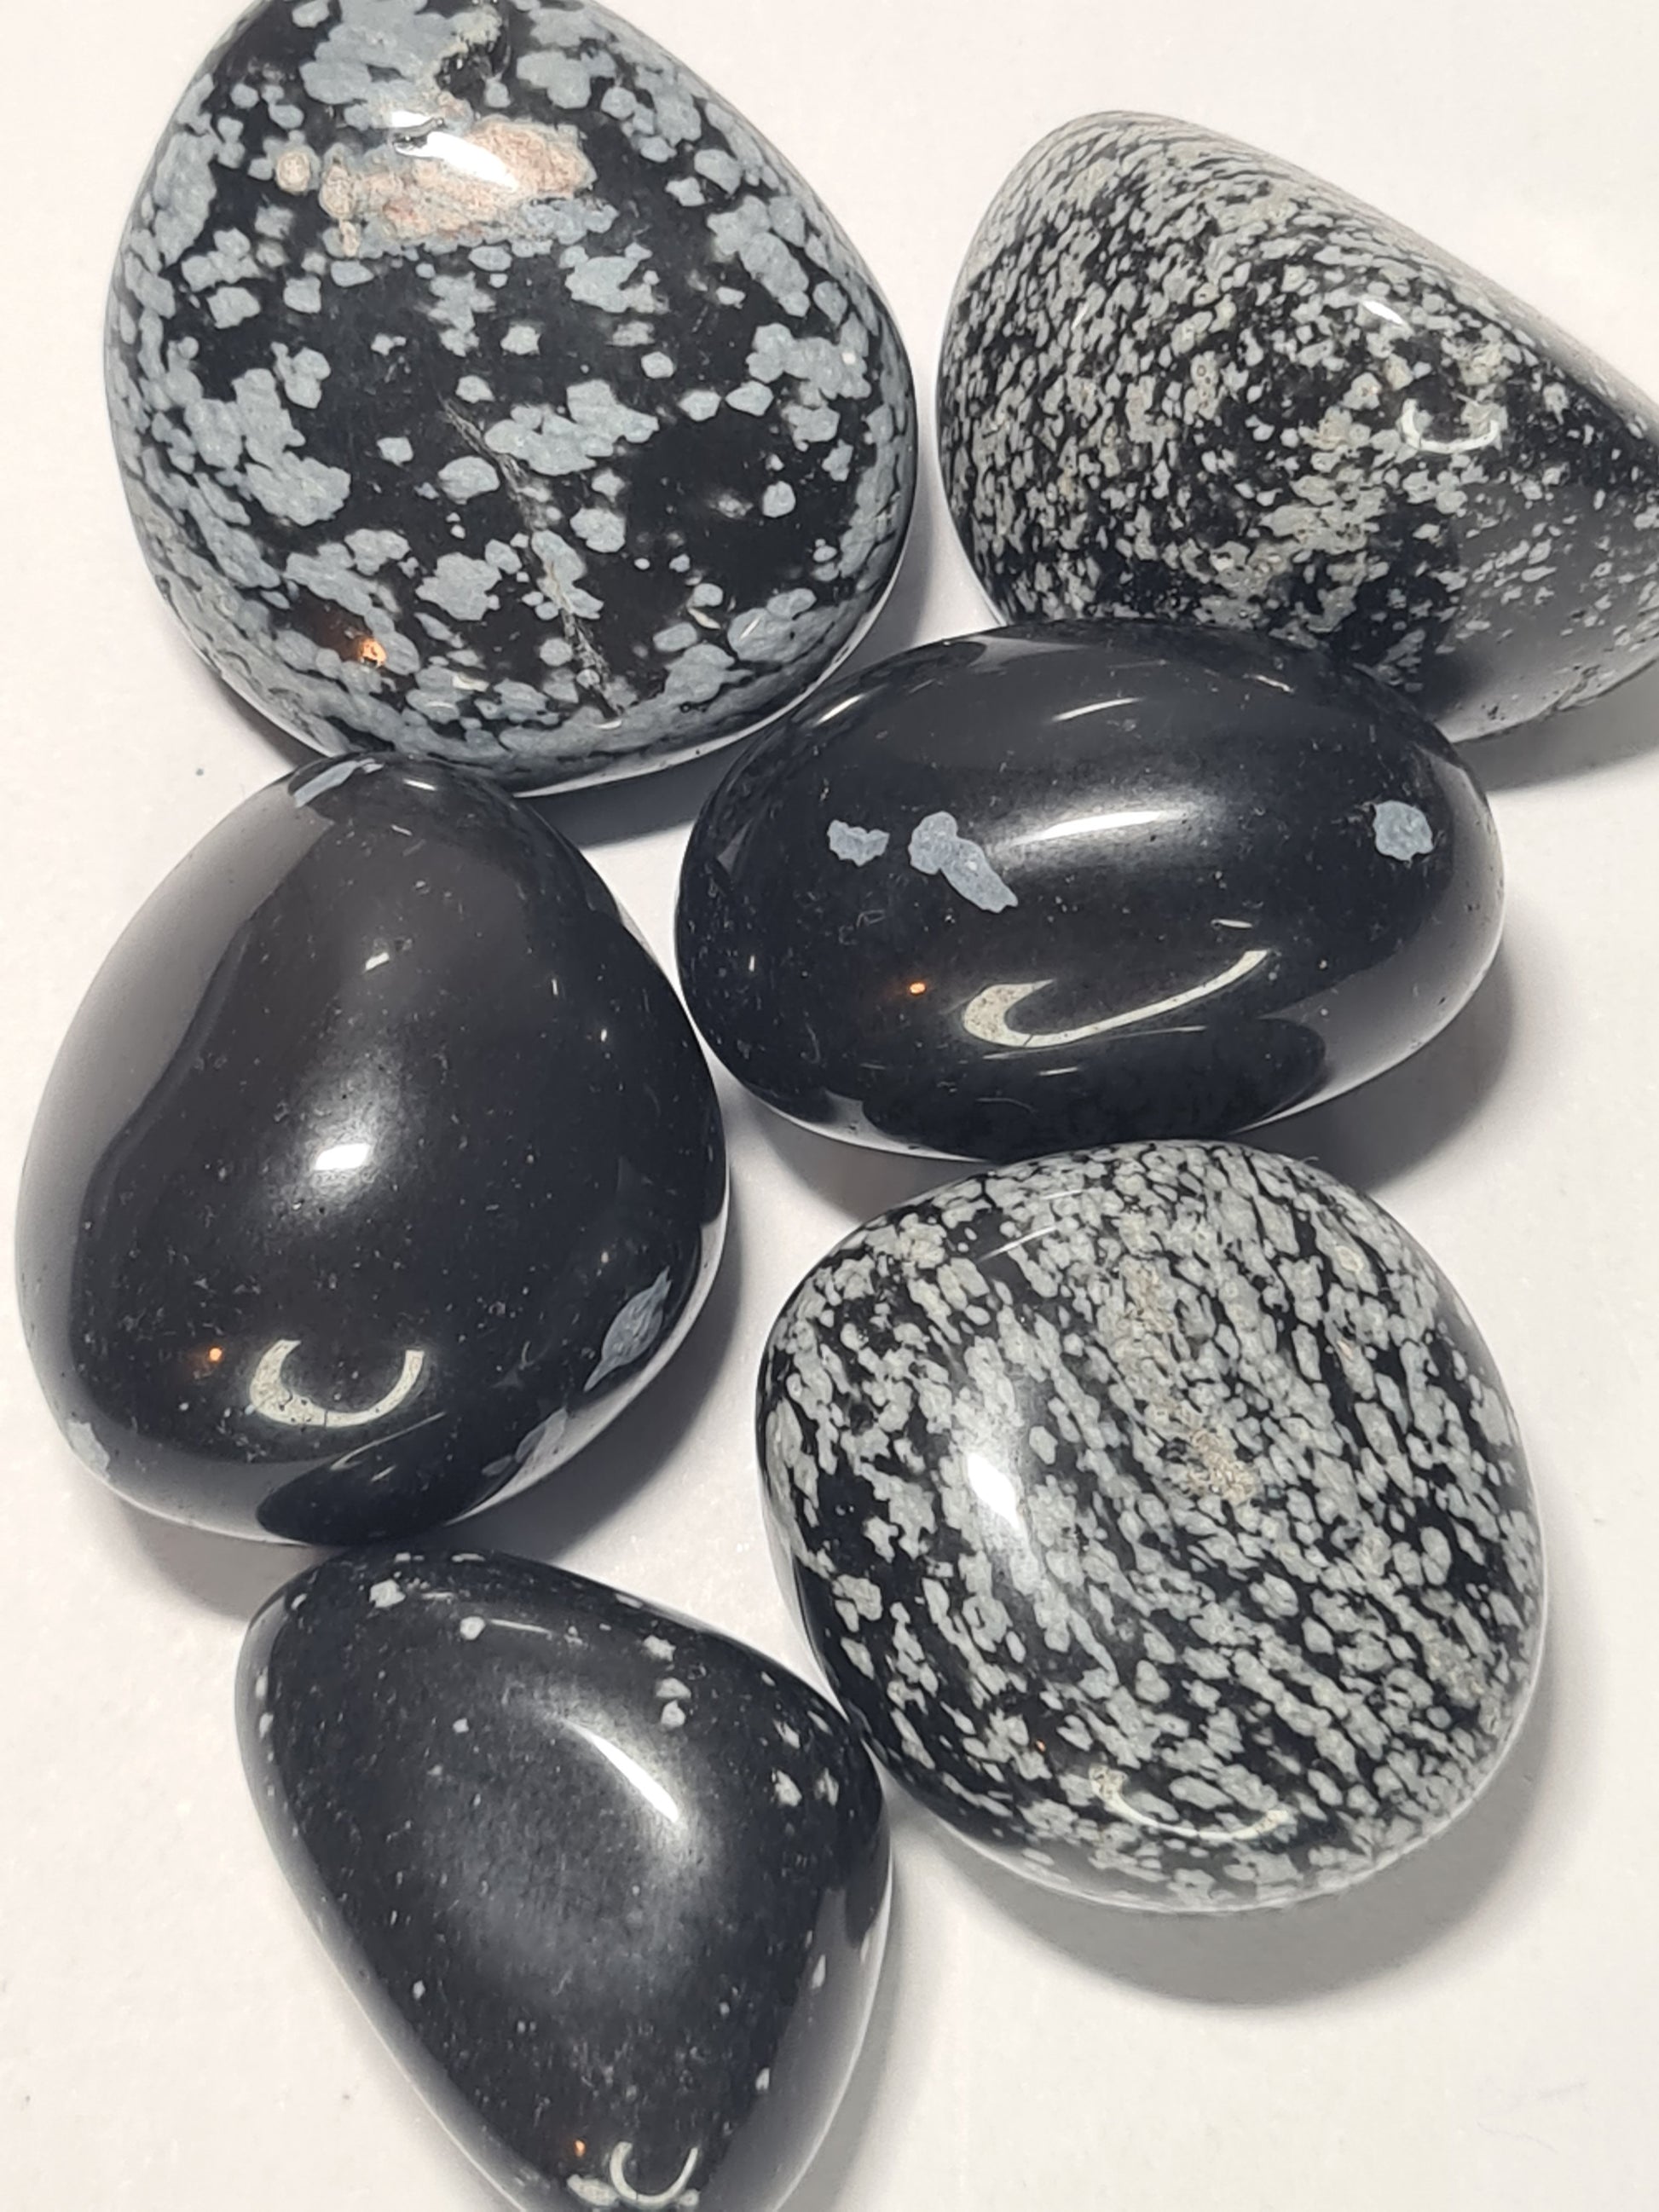 Natural Snowflake Obsidian Tumbles, containing white chrysobalite inclusions giving the look of snowflakes in the tumbles